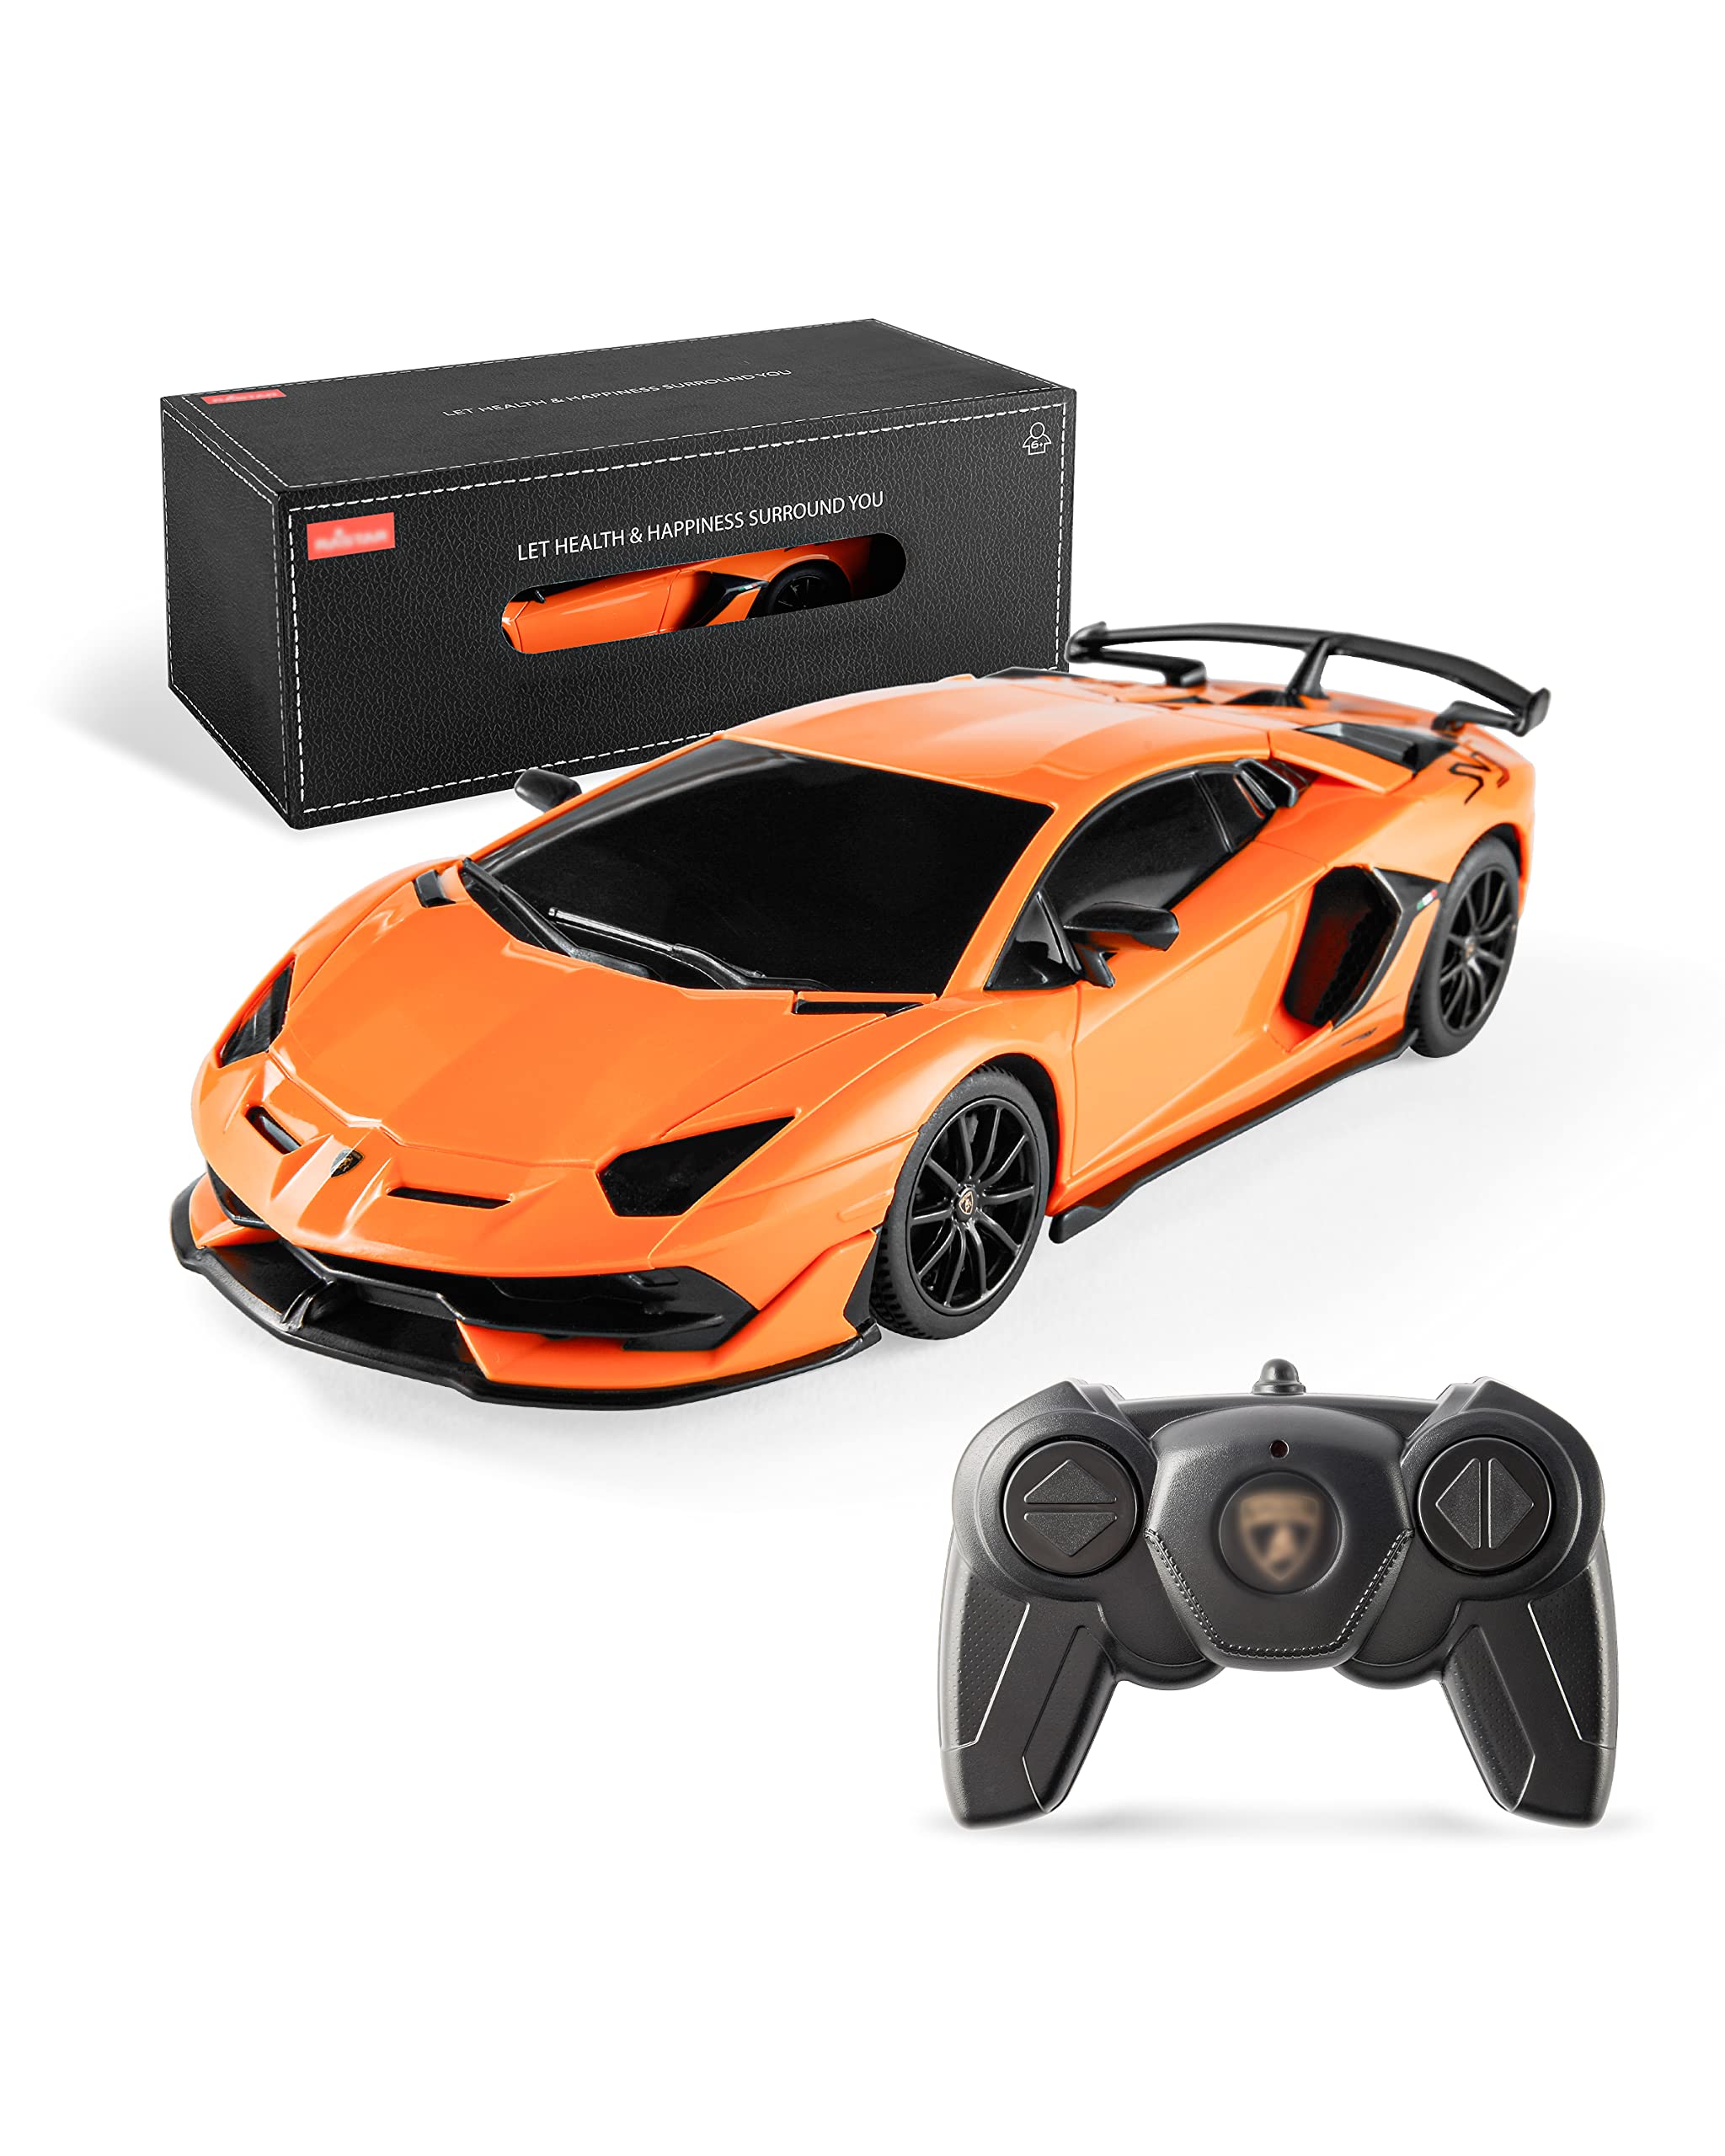 Mua BEZGAR Remote Control Car Licensed RC Series, 1:24 Scale Remote Control Lambo  Aventador SVJ Electric Sport Racing Hobby Toy Car Model Vehicle for  Boys,Girls,Teens and Adults Gift (Orange) trên Amazon Mỹ